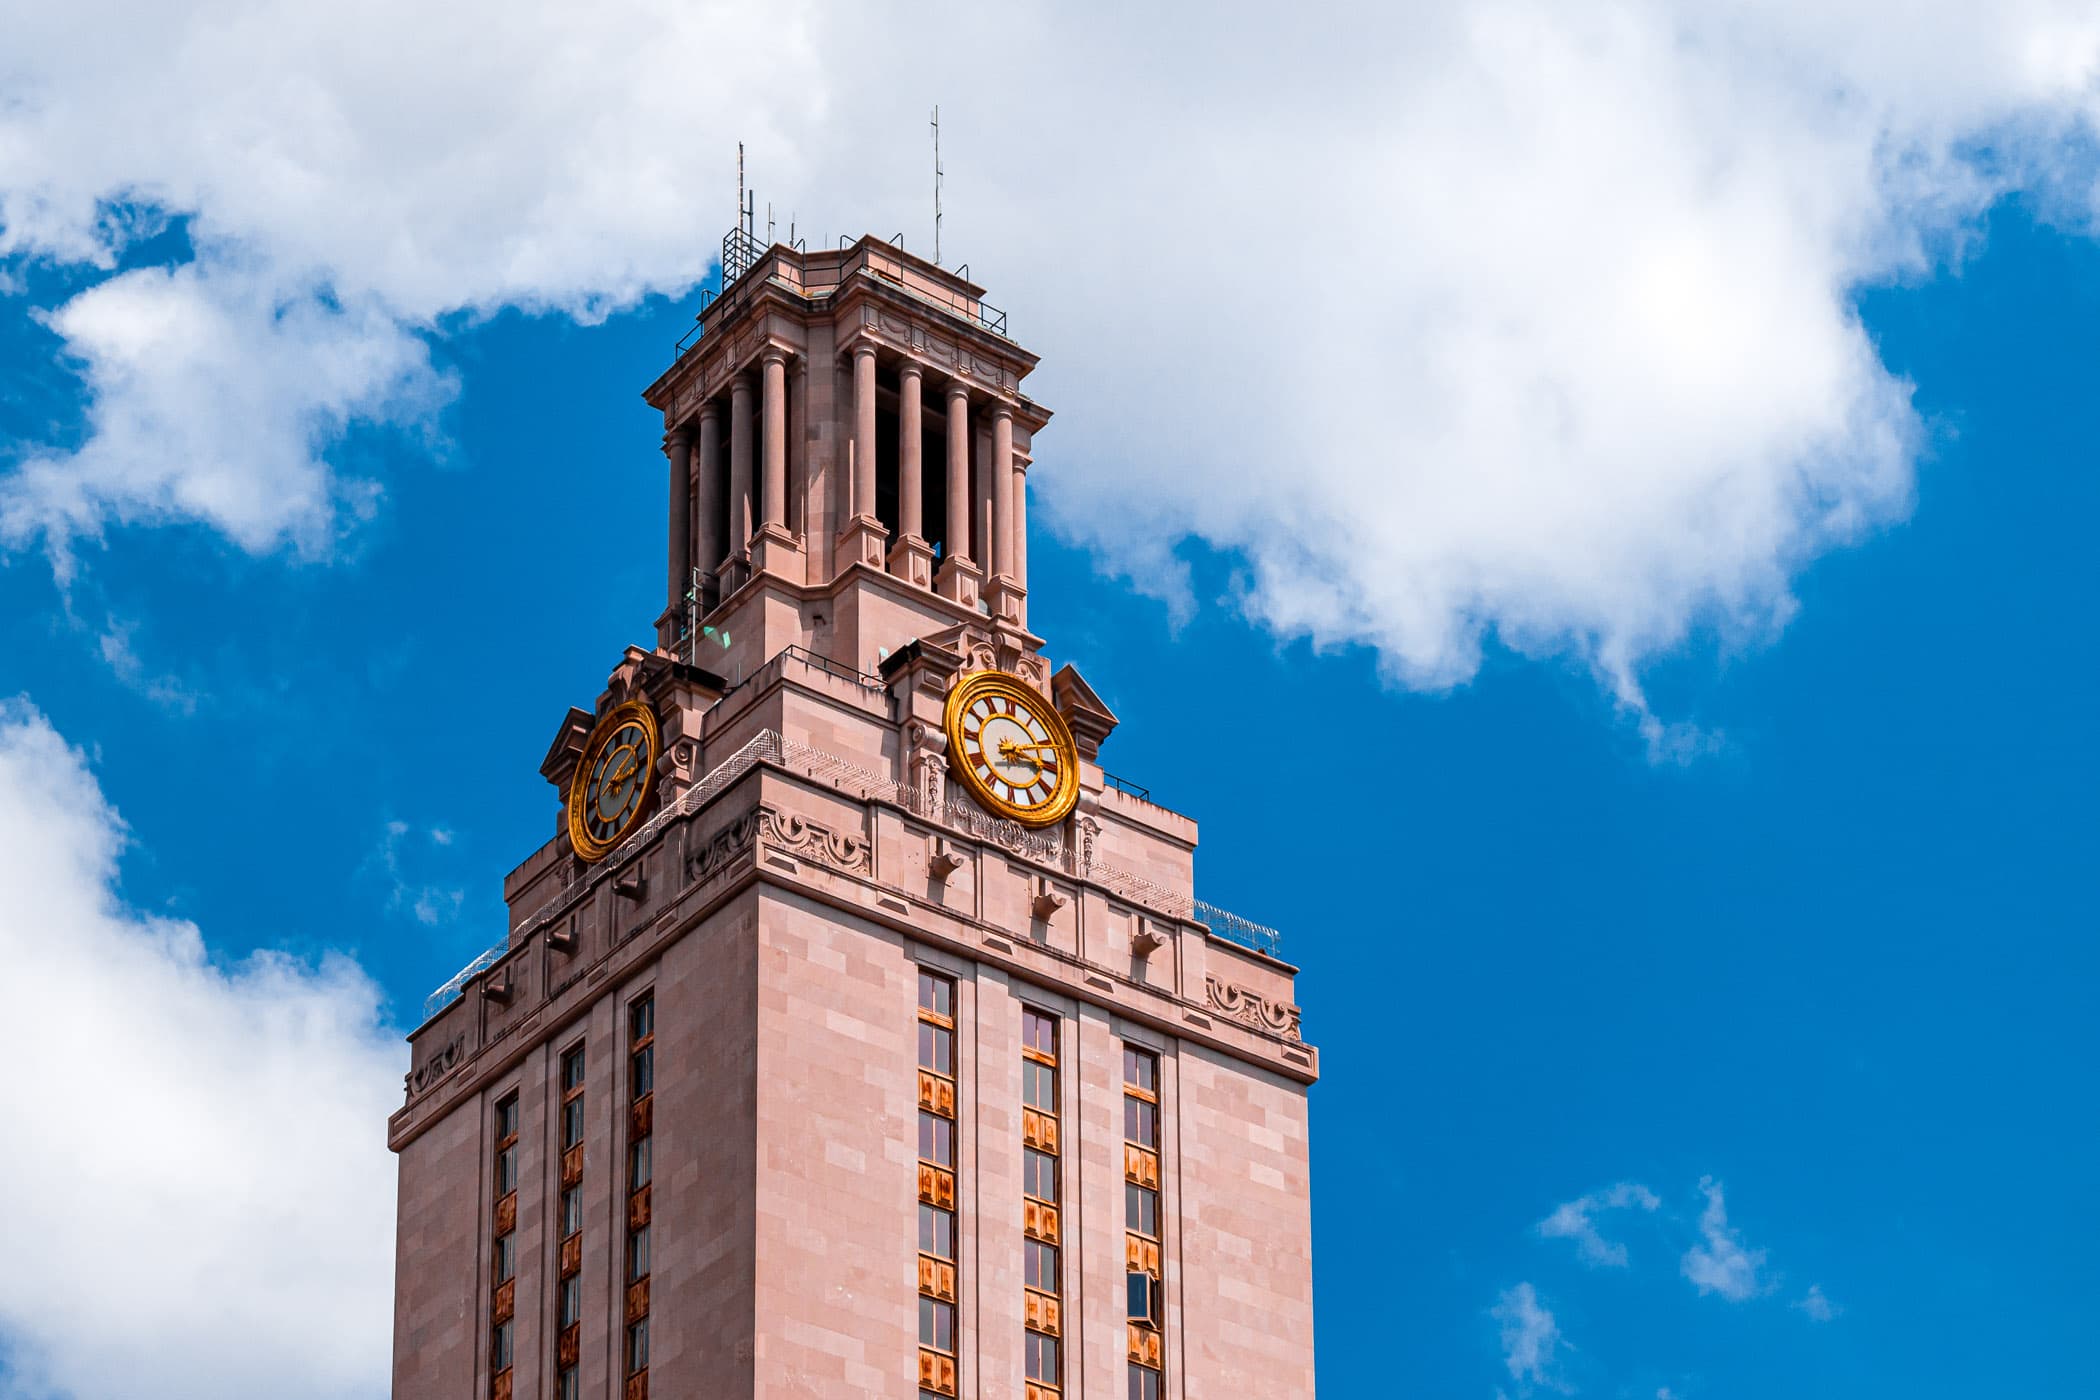 The 307-foot-tall Main Building at the University of Texas at Austin rises into the cloudy Texas sky.